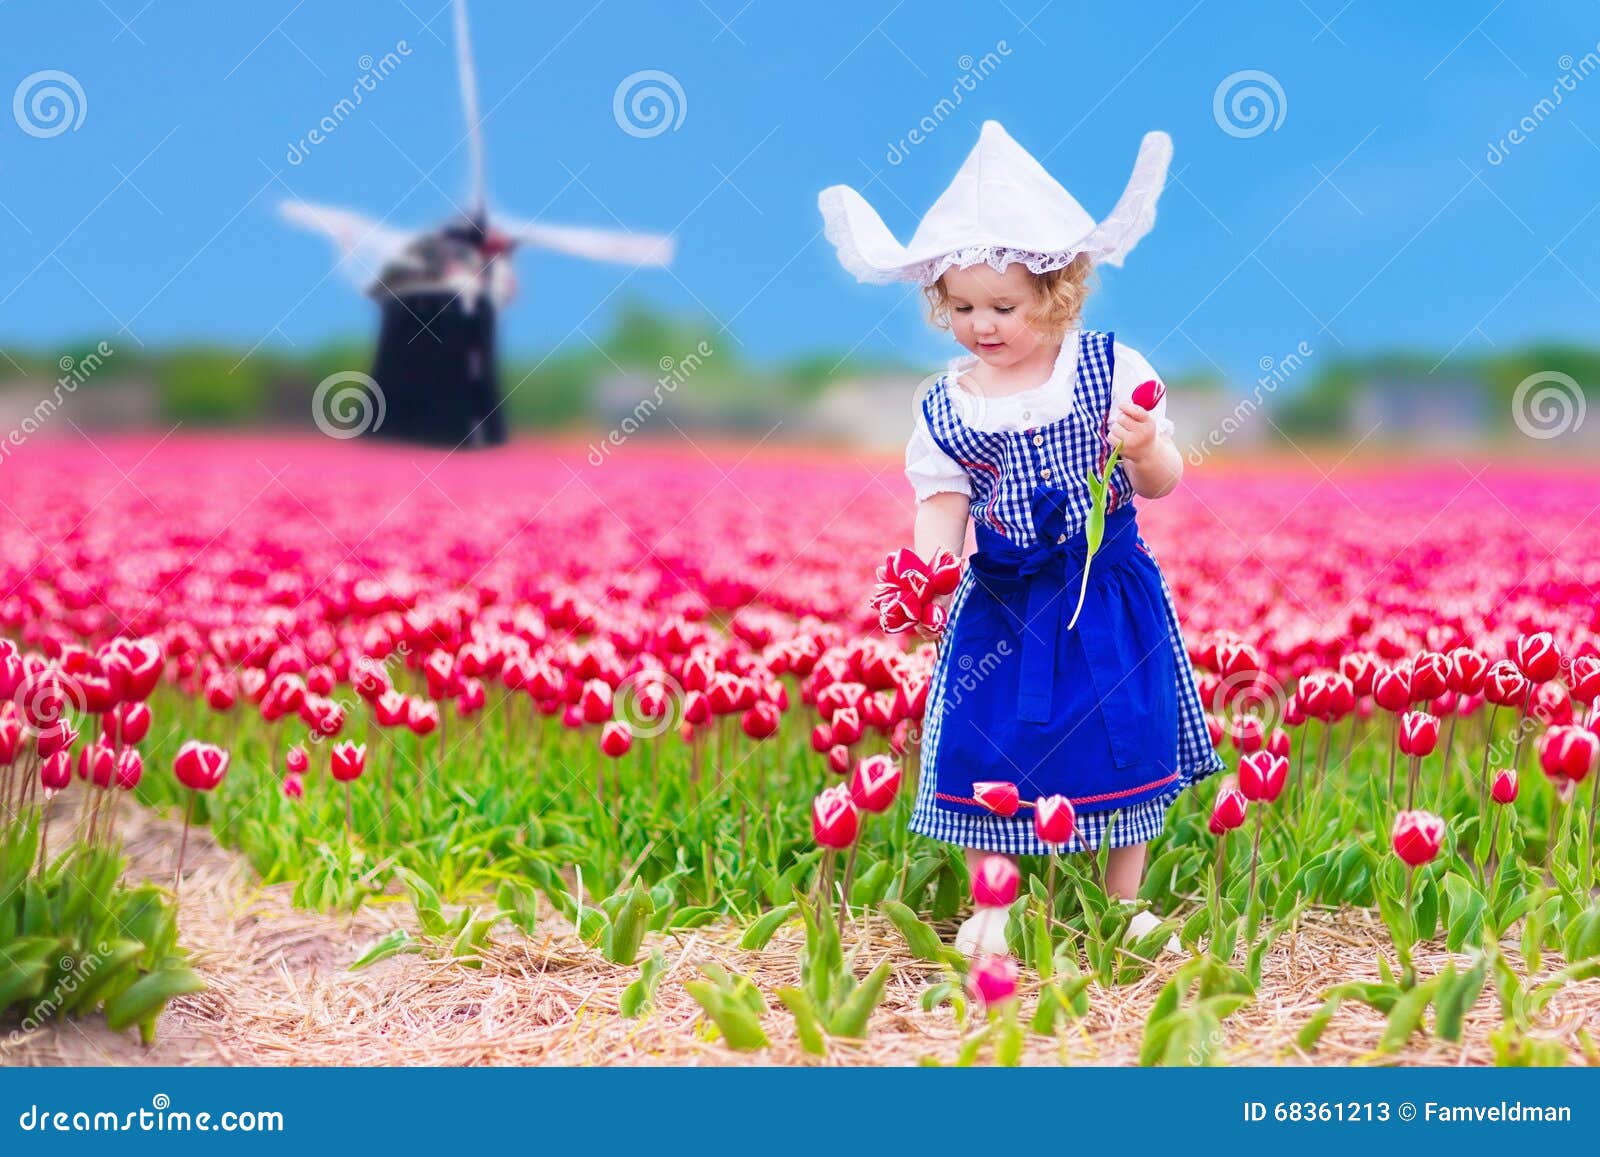 Dutch Girl in Tulip Field in Holland Stock Image - Image of culture ...